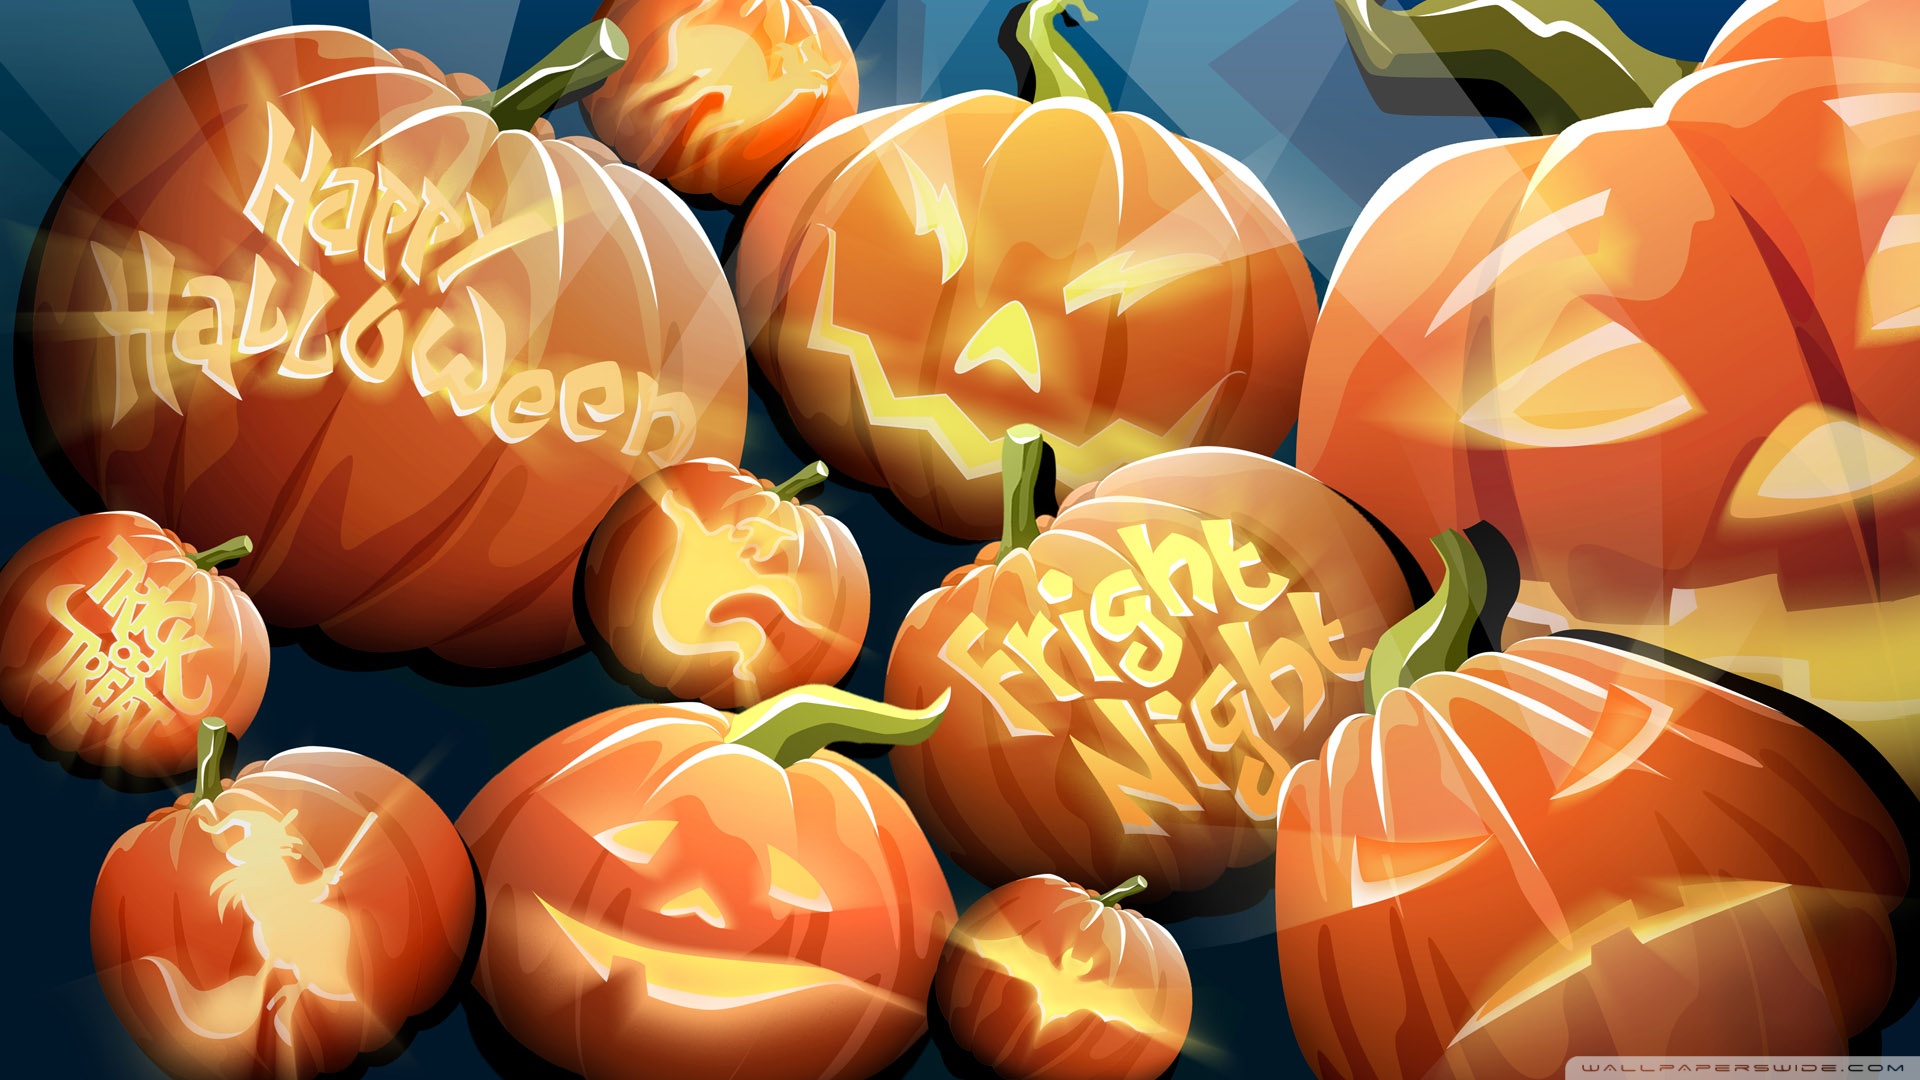 Stunning HD Wallpapers For Your Desktop Happy Halloween Edition!